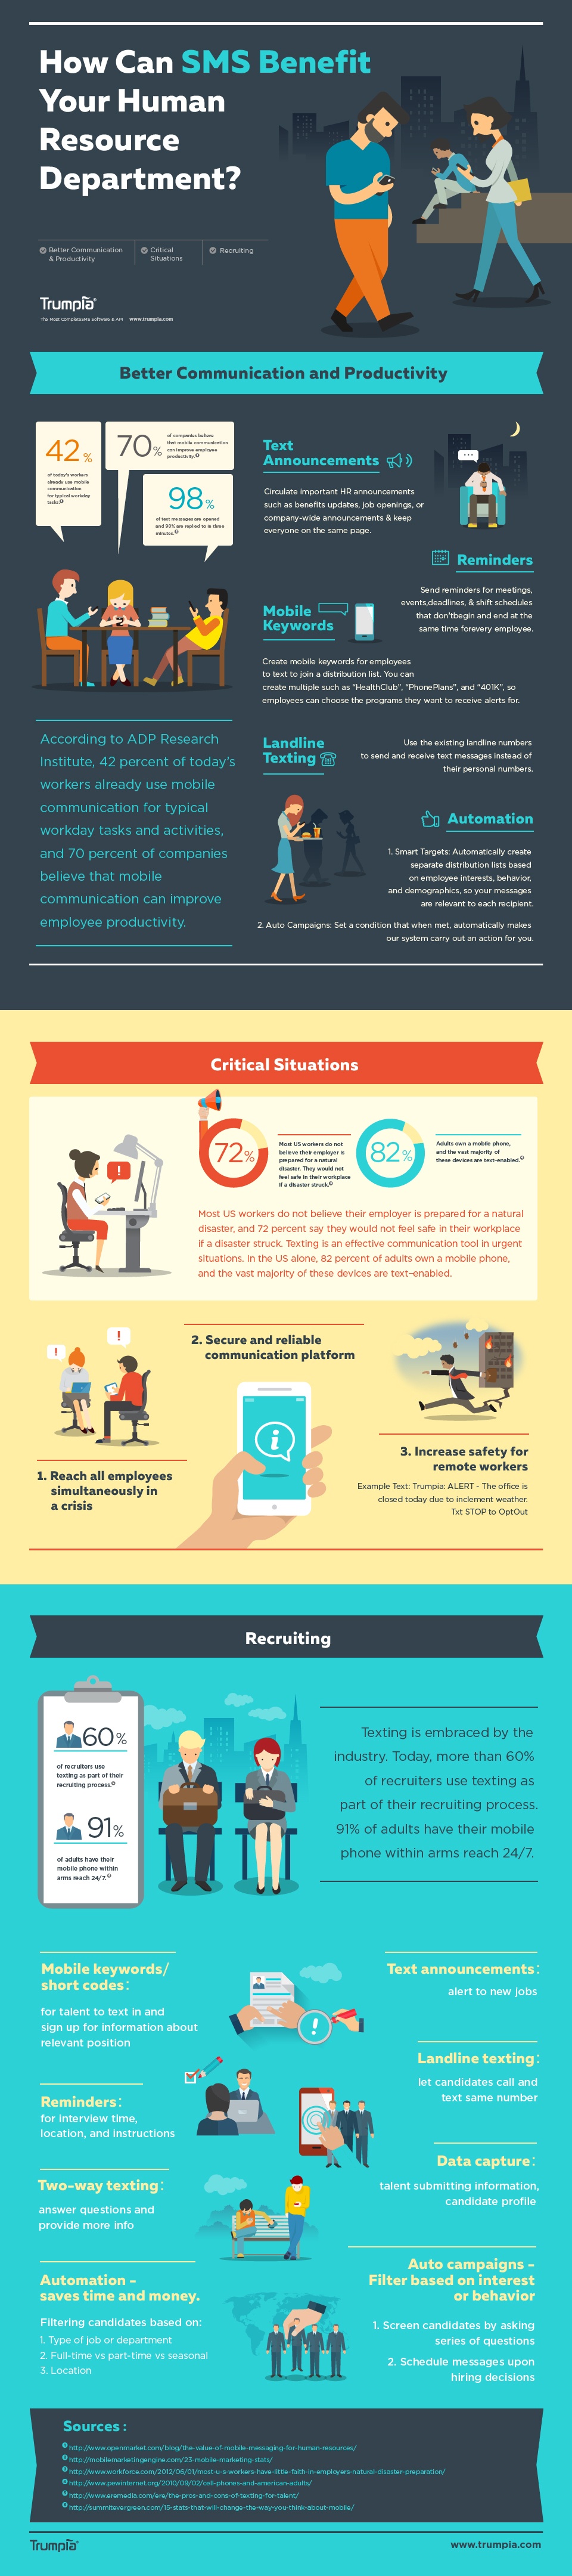 Infographic: How Can SMS Benefit HR? (Source: Trumpia)